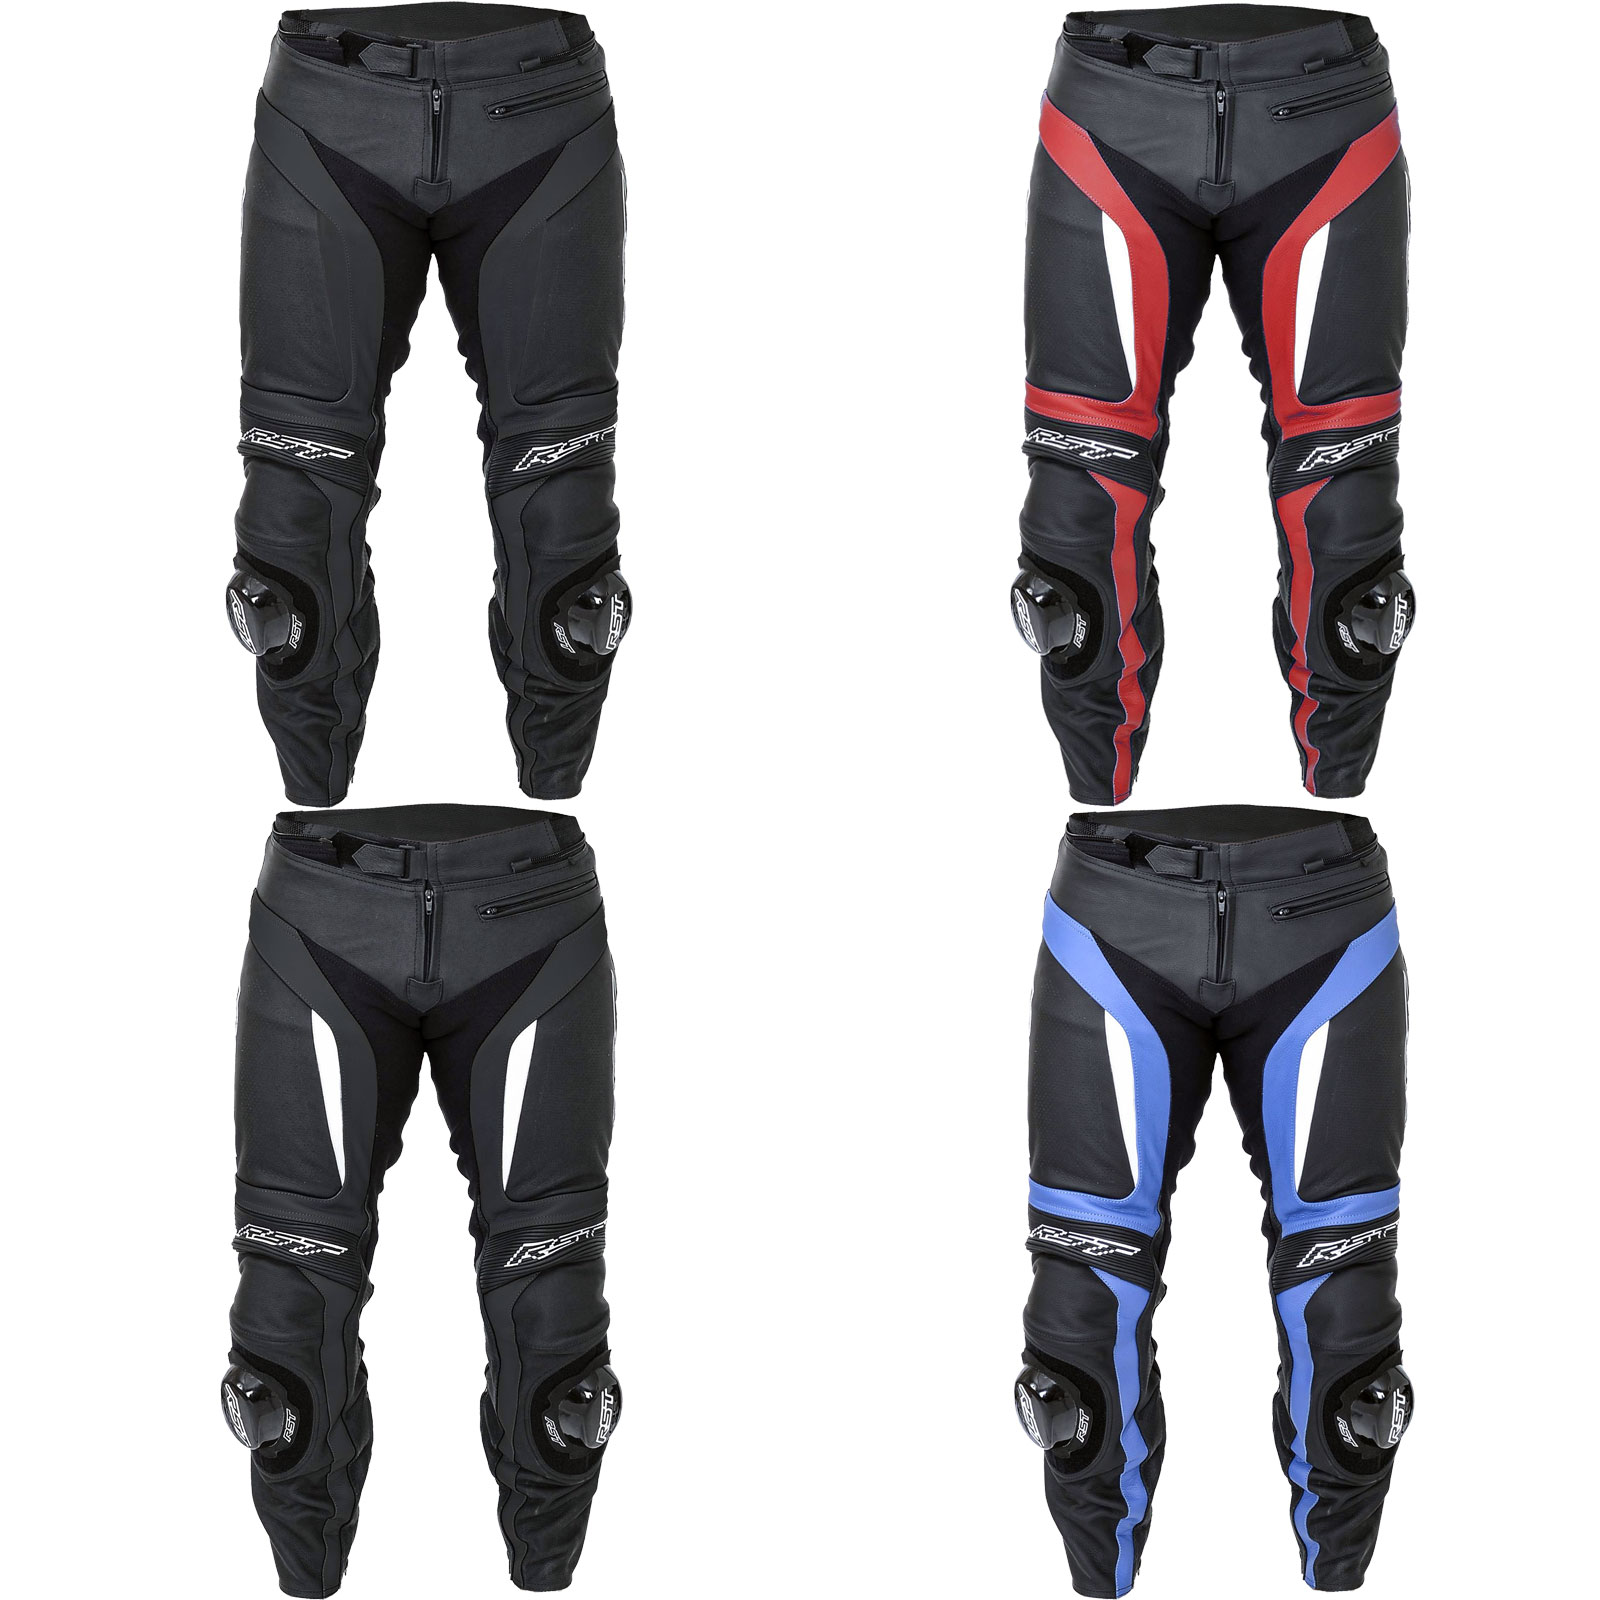 rst blade 2 leather trousers